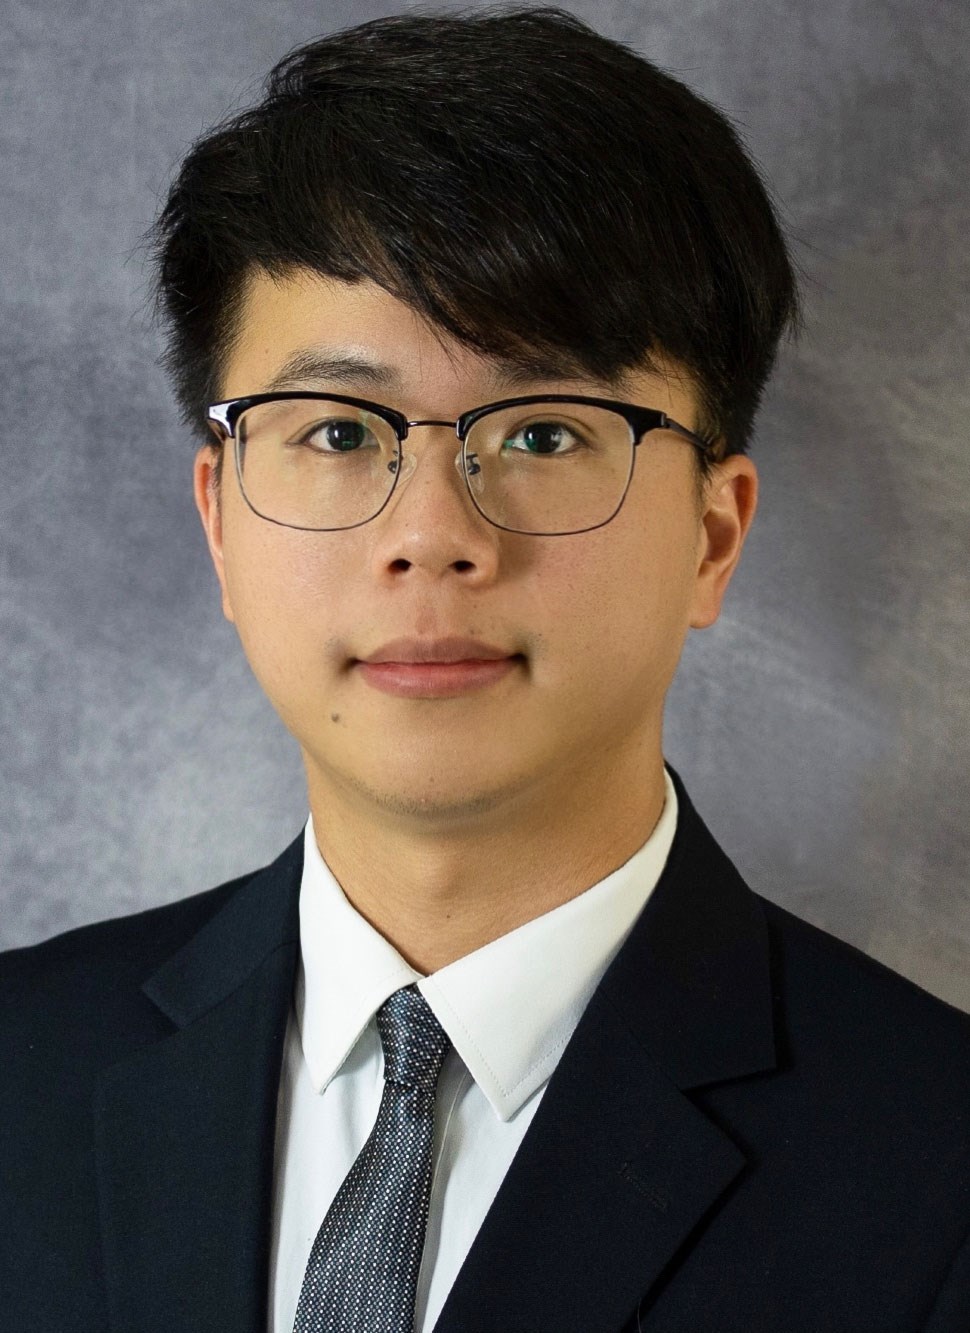 Rui Wu is a Ph.D. Candidate and Researcher in the Laboratory of Optics at UMass Lowell.